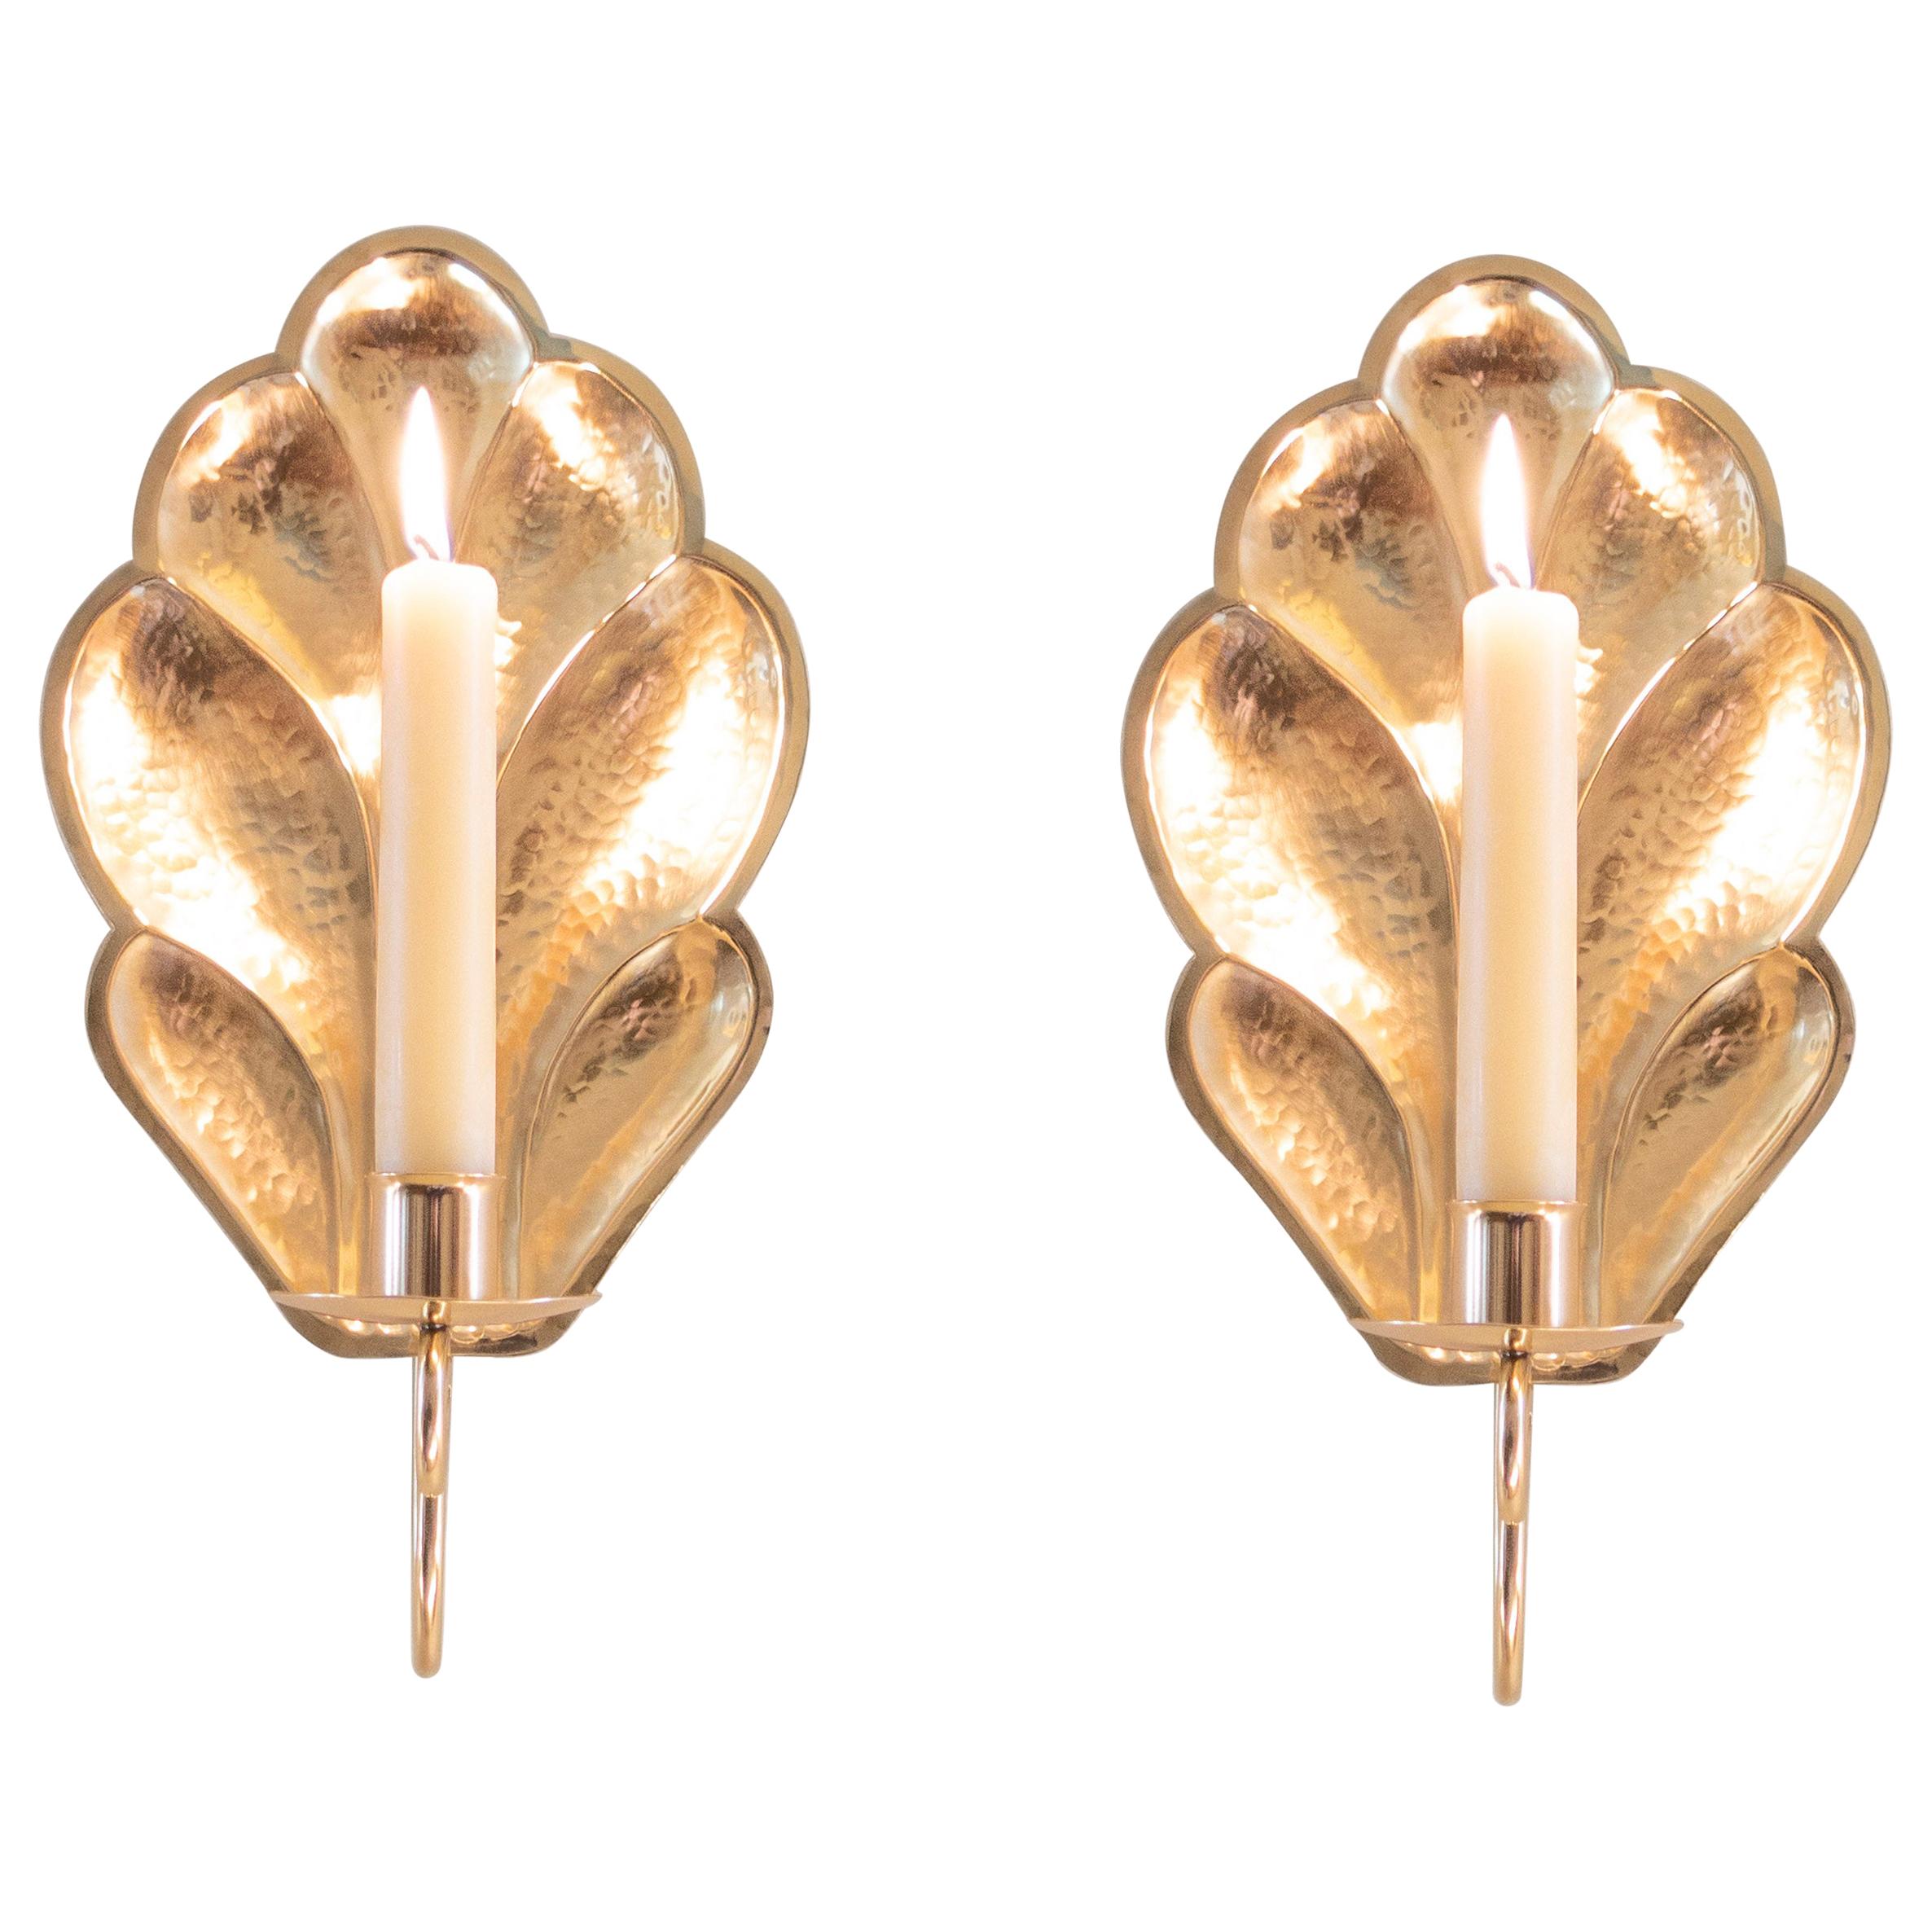 Arvid Johansson, Pair of Swedish Mid-20th Century Hammered Brass Sconces For Sale